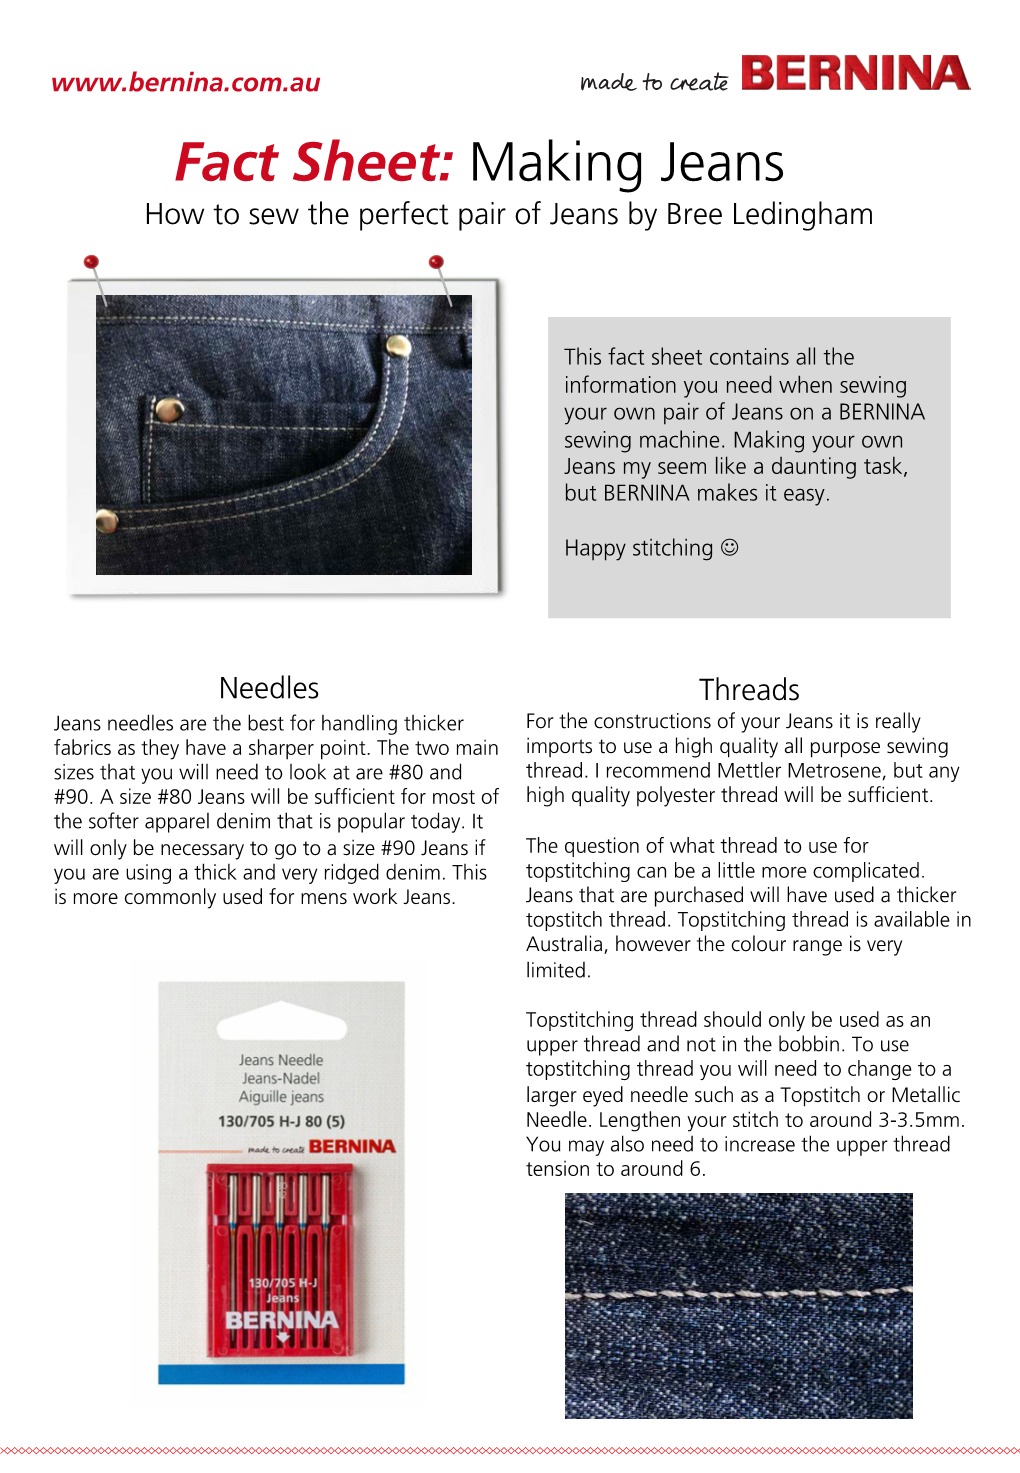 Fact Sheet: Making Jeans How to Sew the Perfect Pair of Jeans by Bree Ledingham